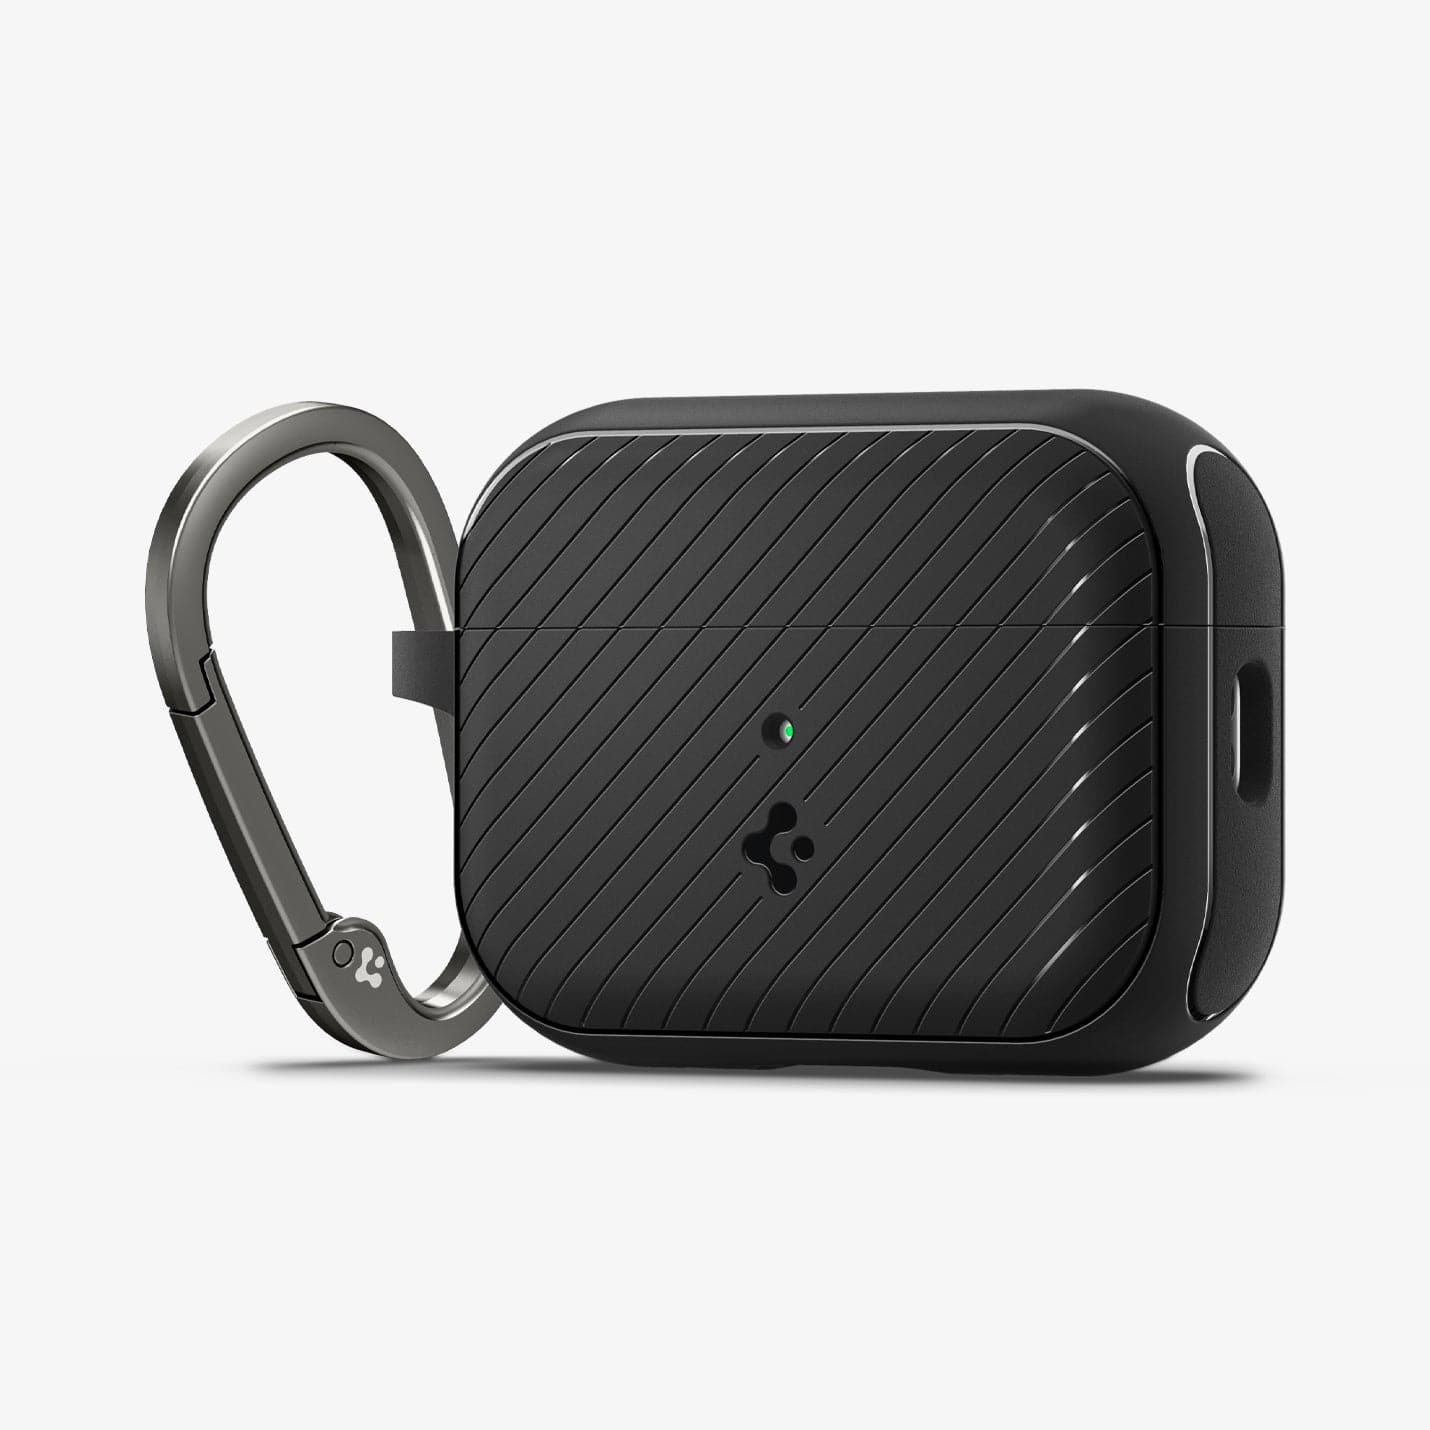 ACS05484 - Apple AirPods Pro 2 Case Mag Armor (MagFit) in matte black showing the front and side with carabiner